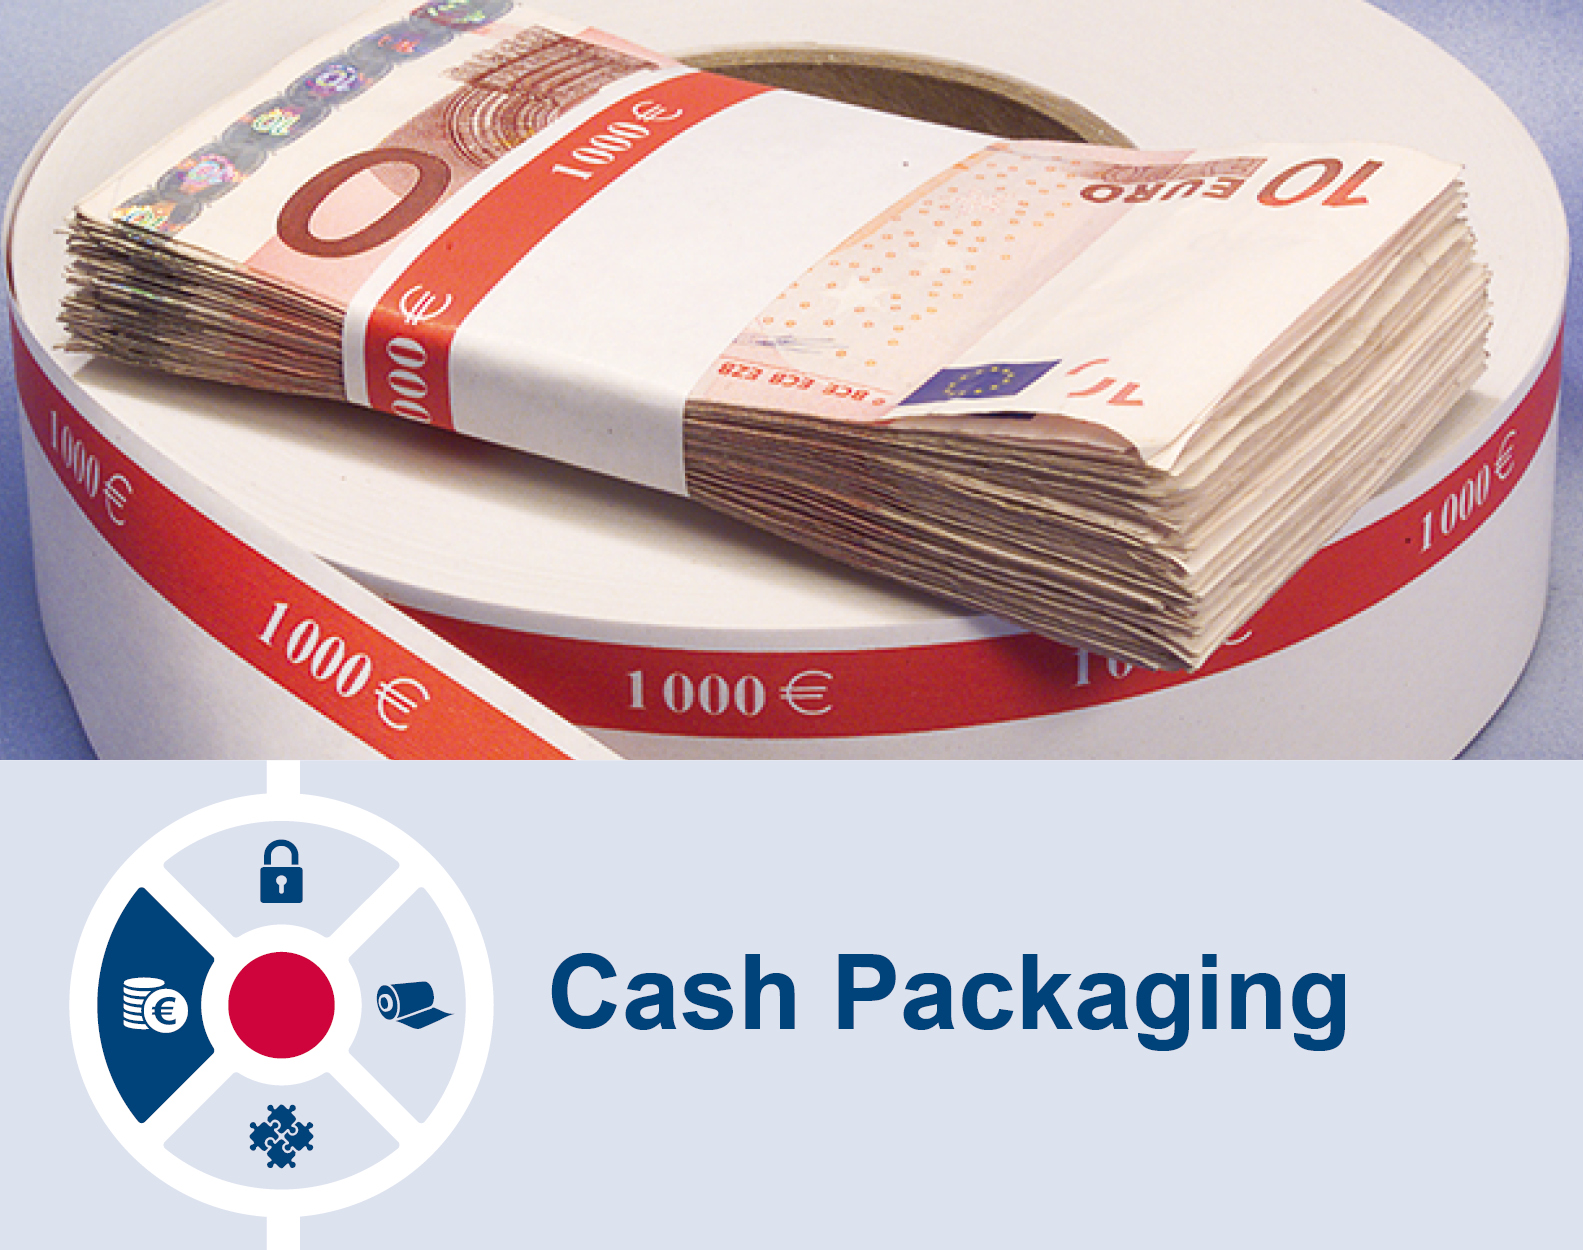 Cash Packaging
Your cash safely packaged. Economical, proven and well established.